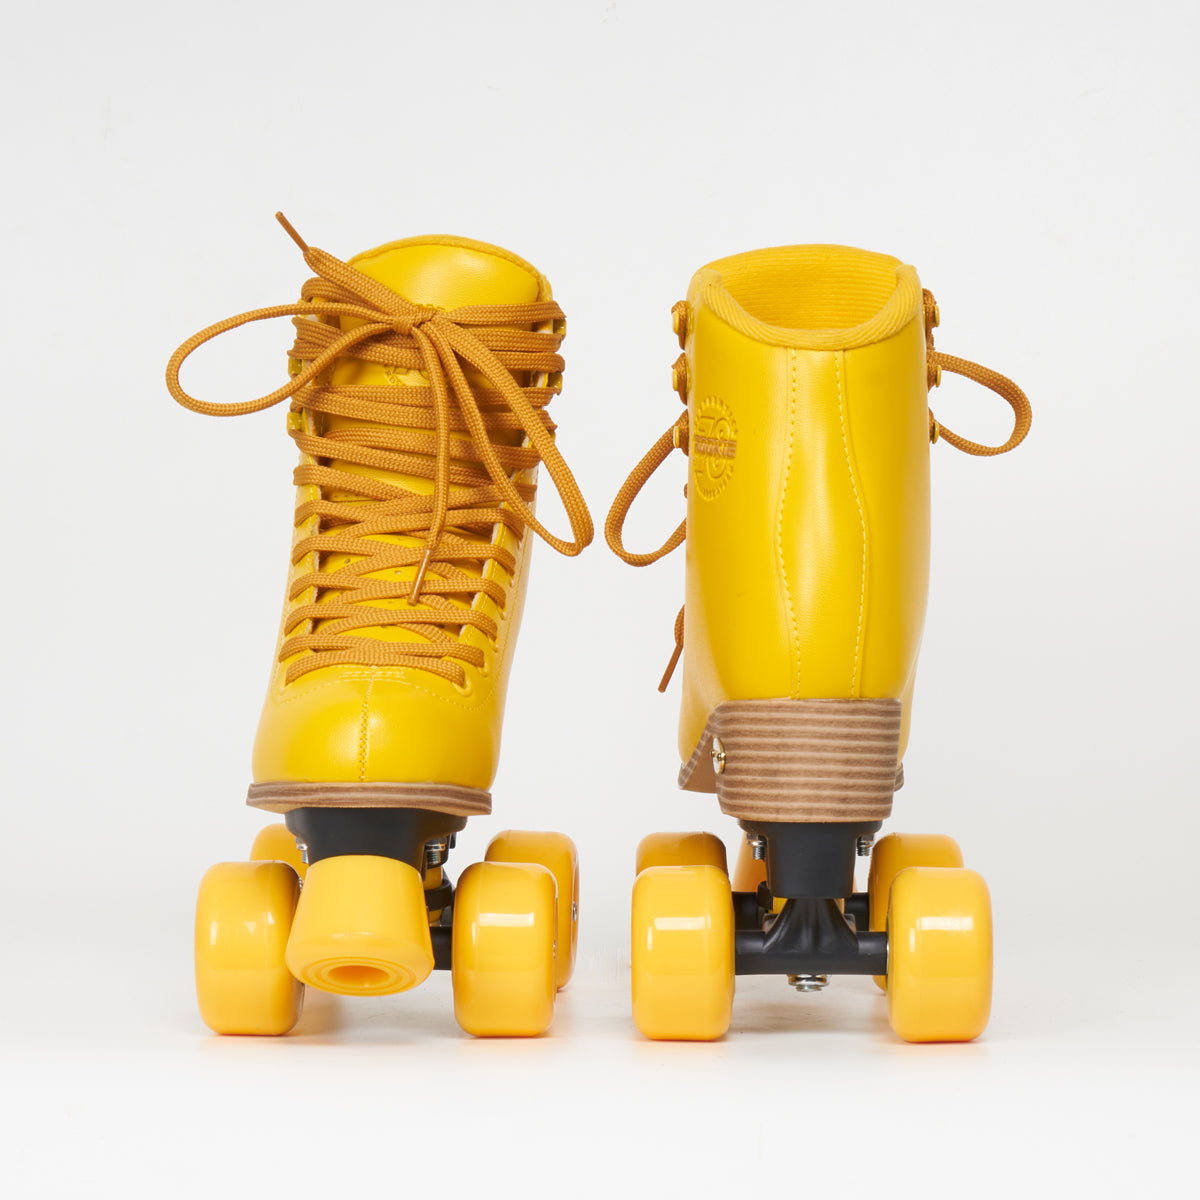 Rookie Classic 78 Roller Skates - Yellow